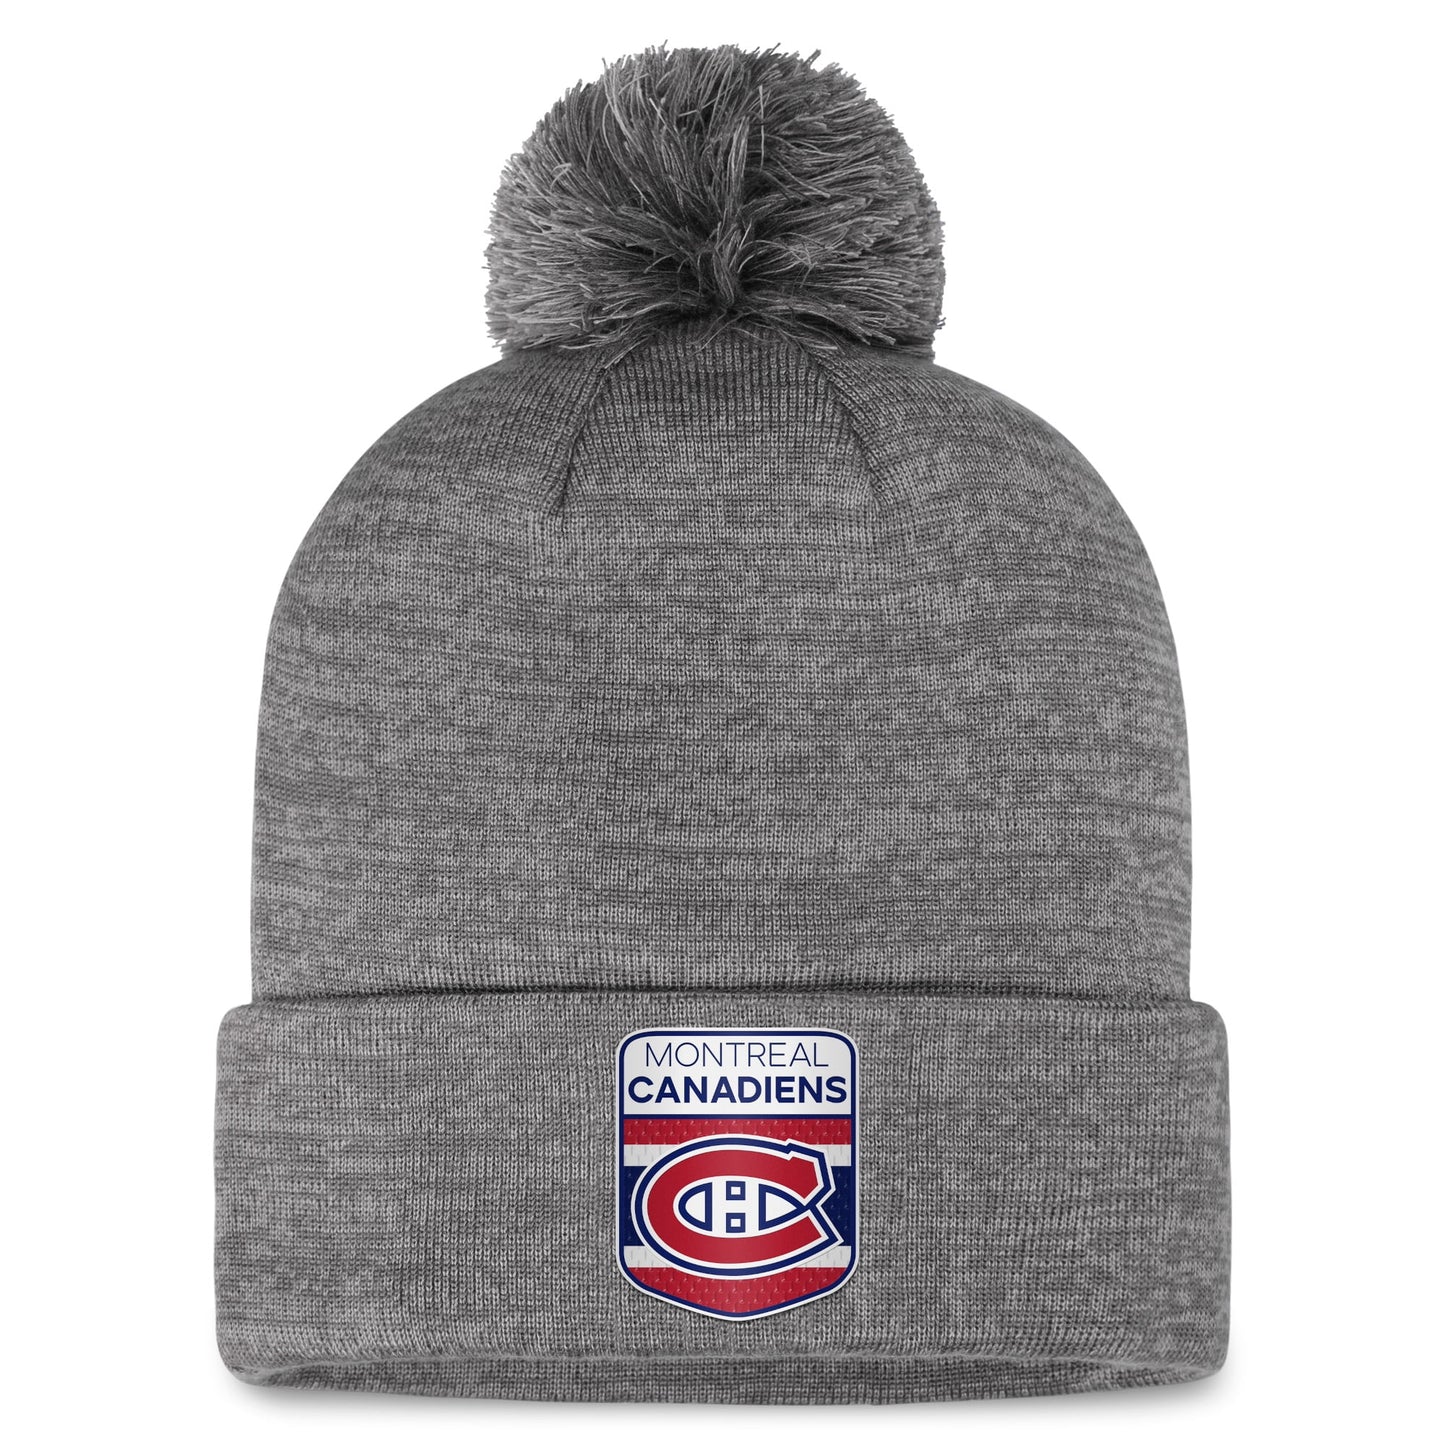 Men's Fanatics Branded  Gray Montreal Canadiens Authentic Pro Home Ice Cuffed Knit Hat with Pom - OSFA